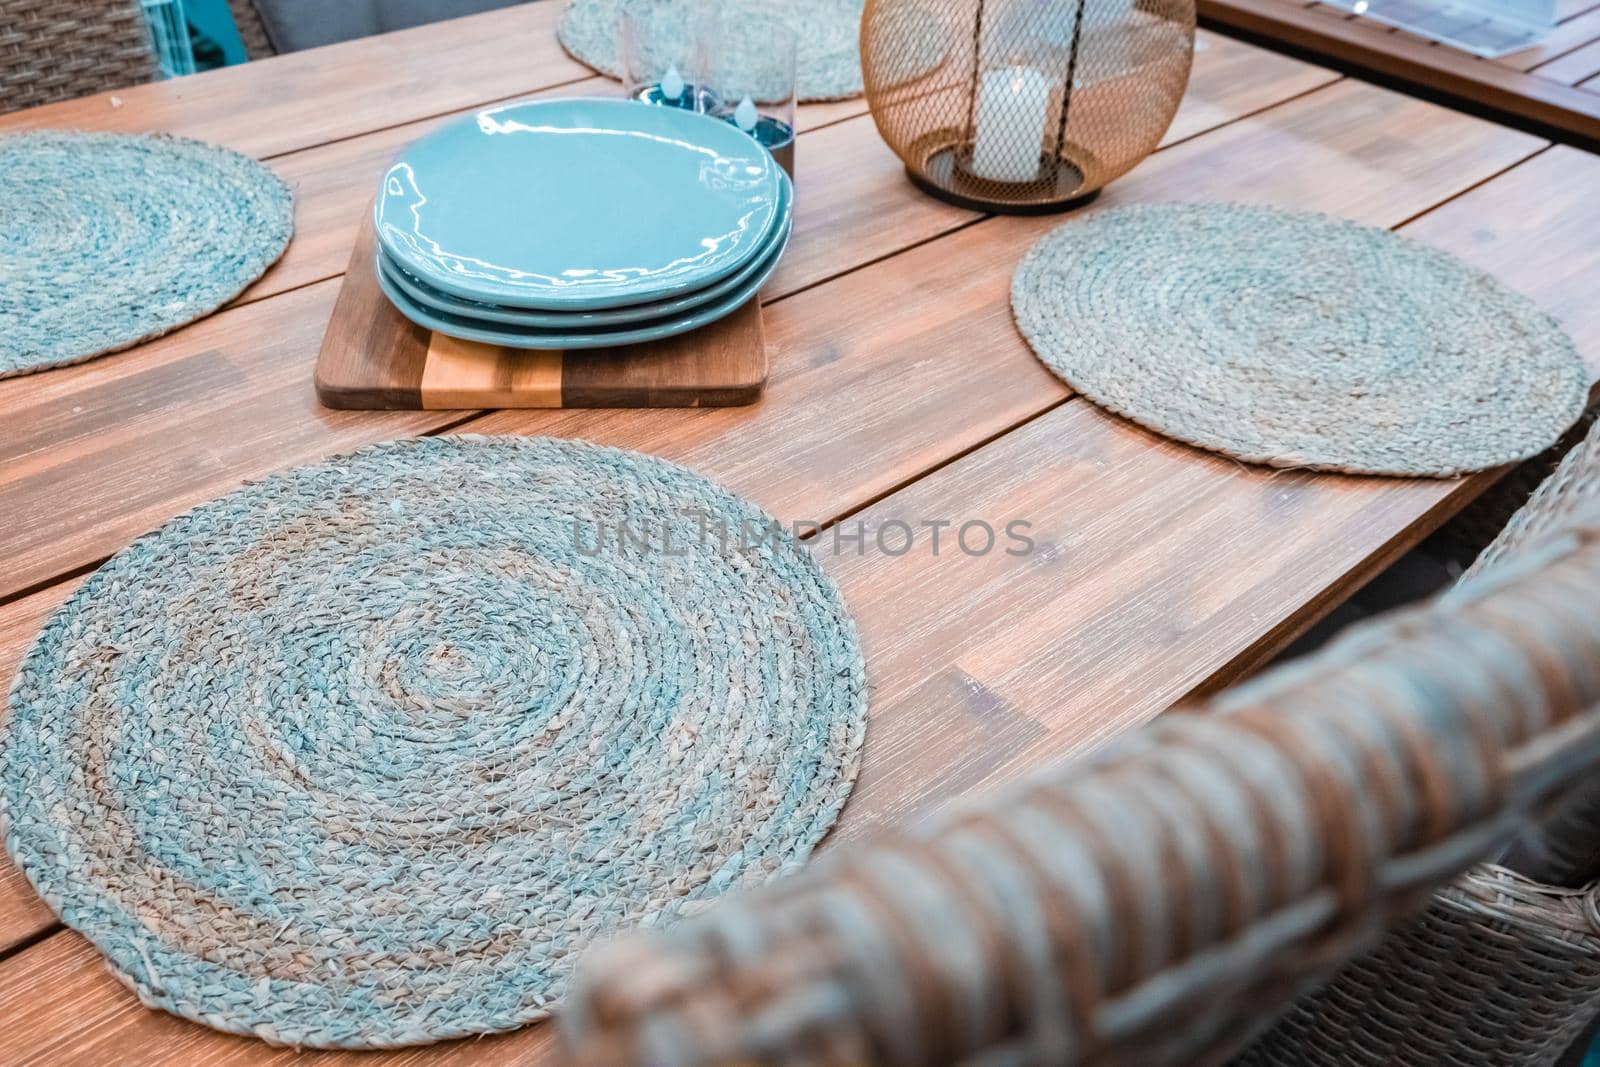 dish on the wood table .